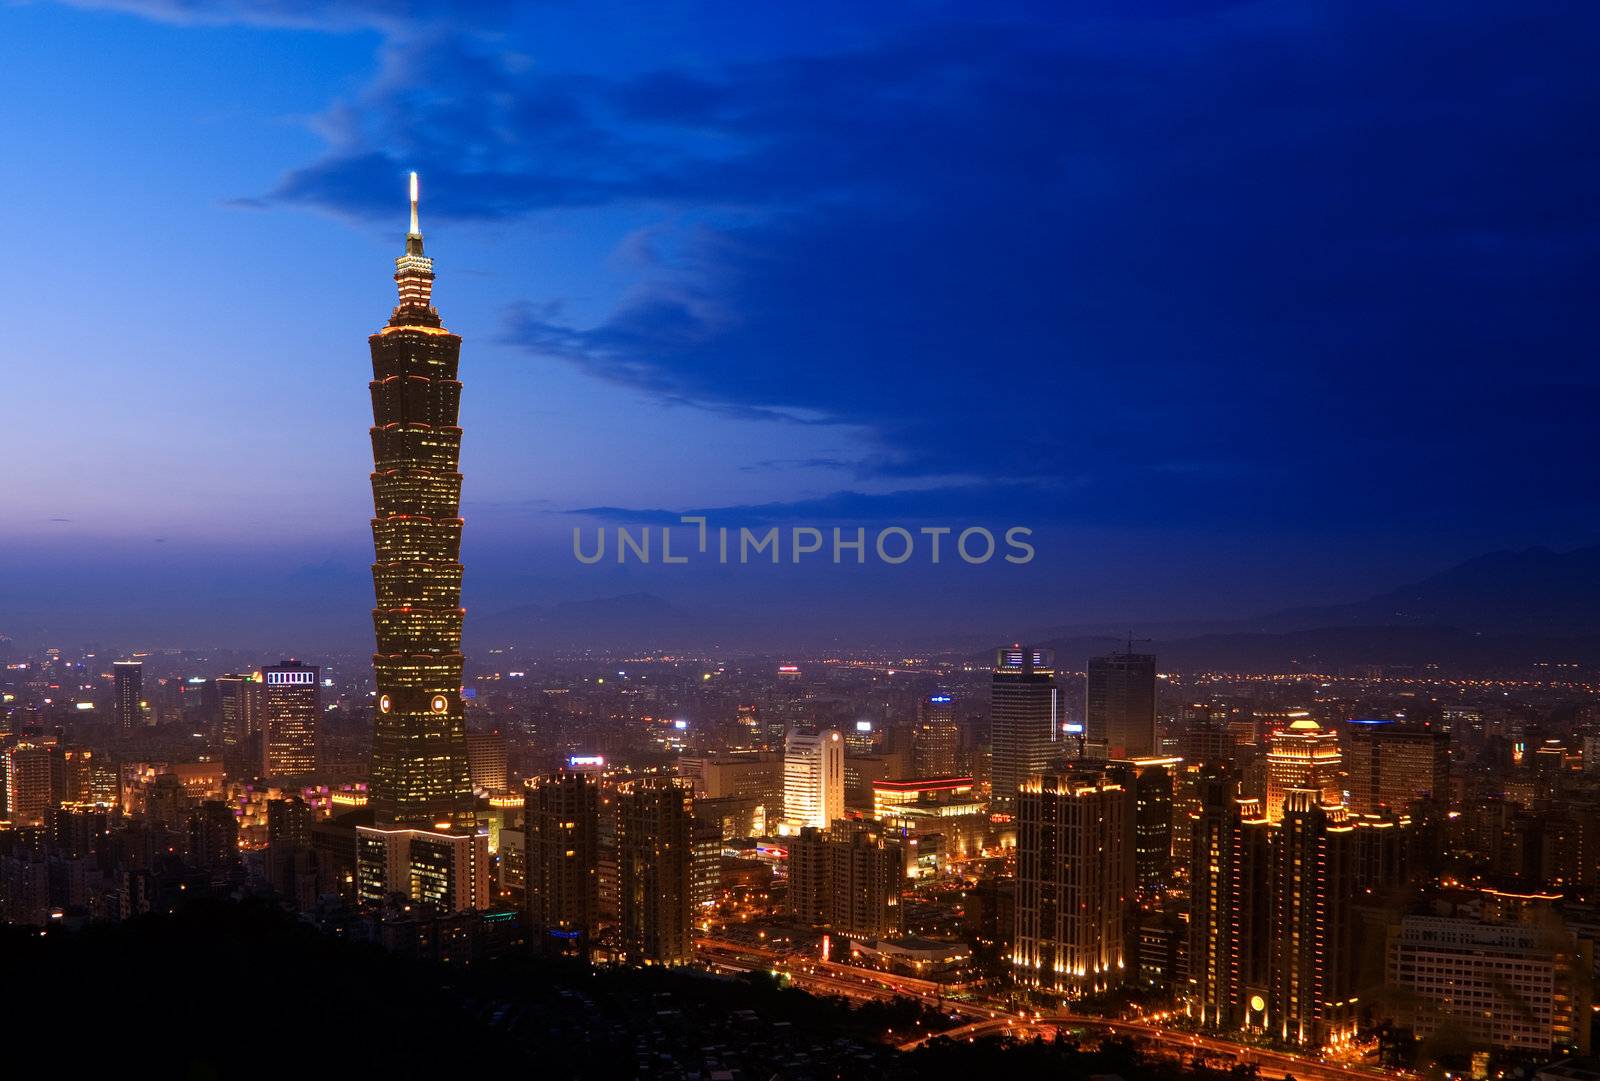 Night was coming and lights of downtown were glory. Taipei 101 is guardian of the city.